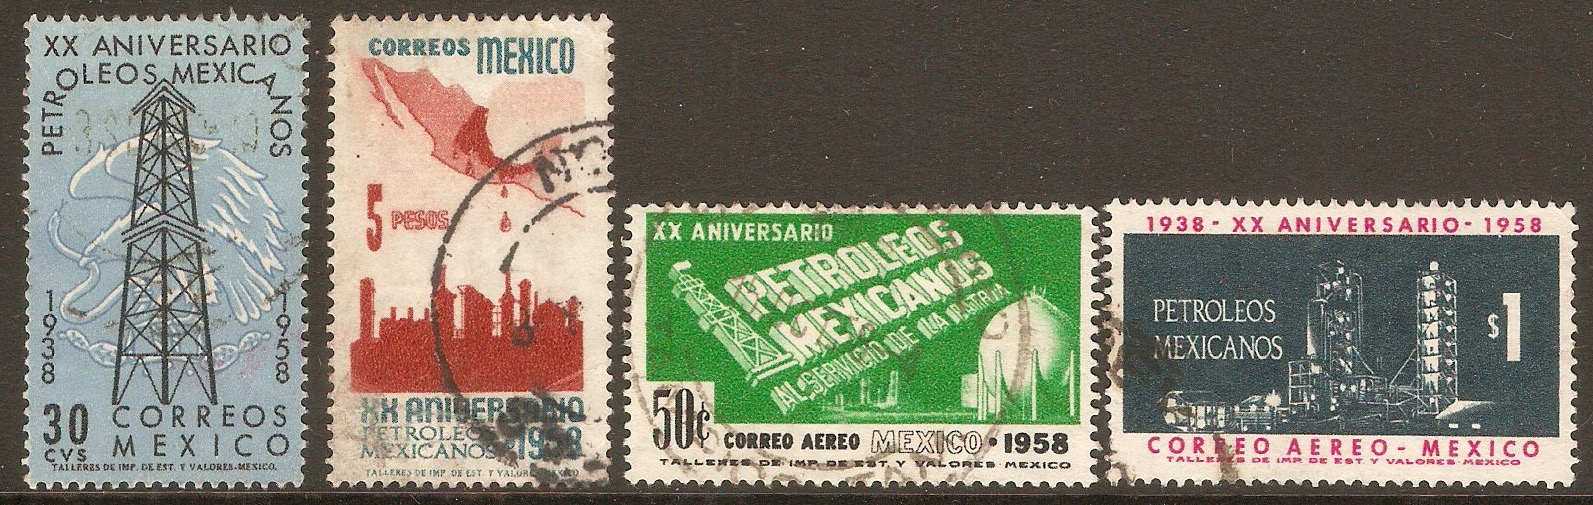 Mexico 1958 Oil Industry Anniversary set. SG964-SG967.